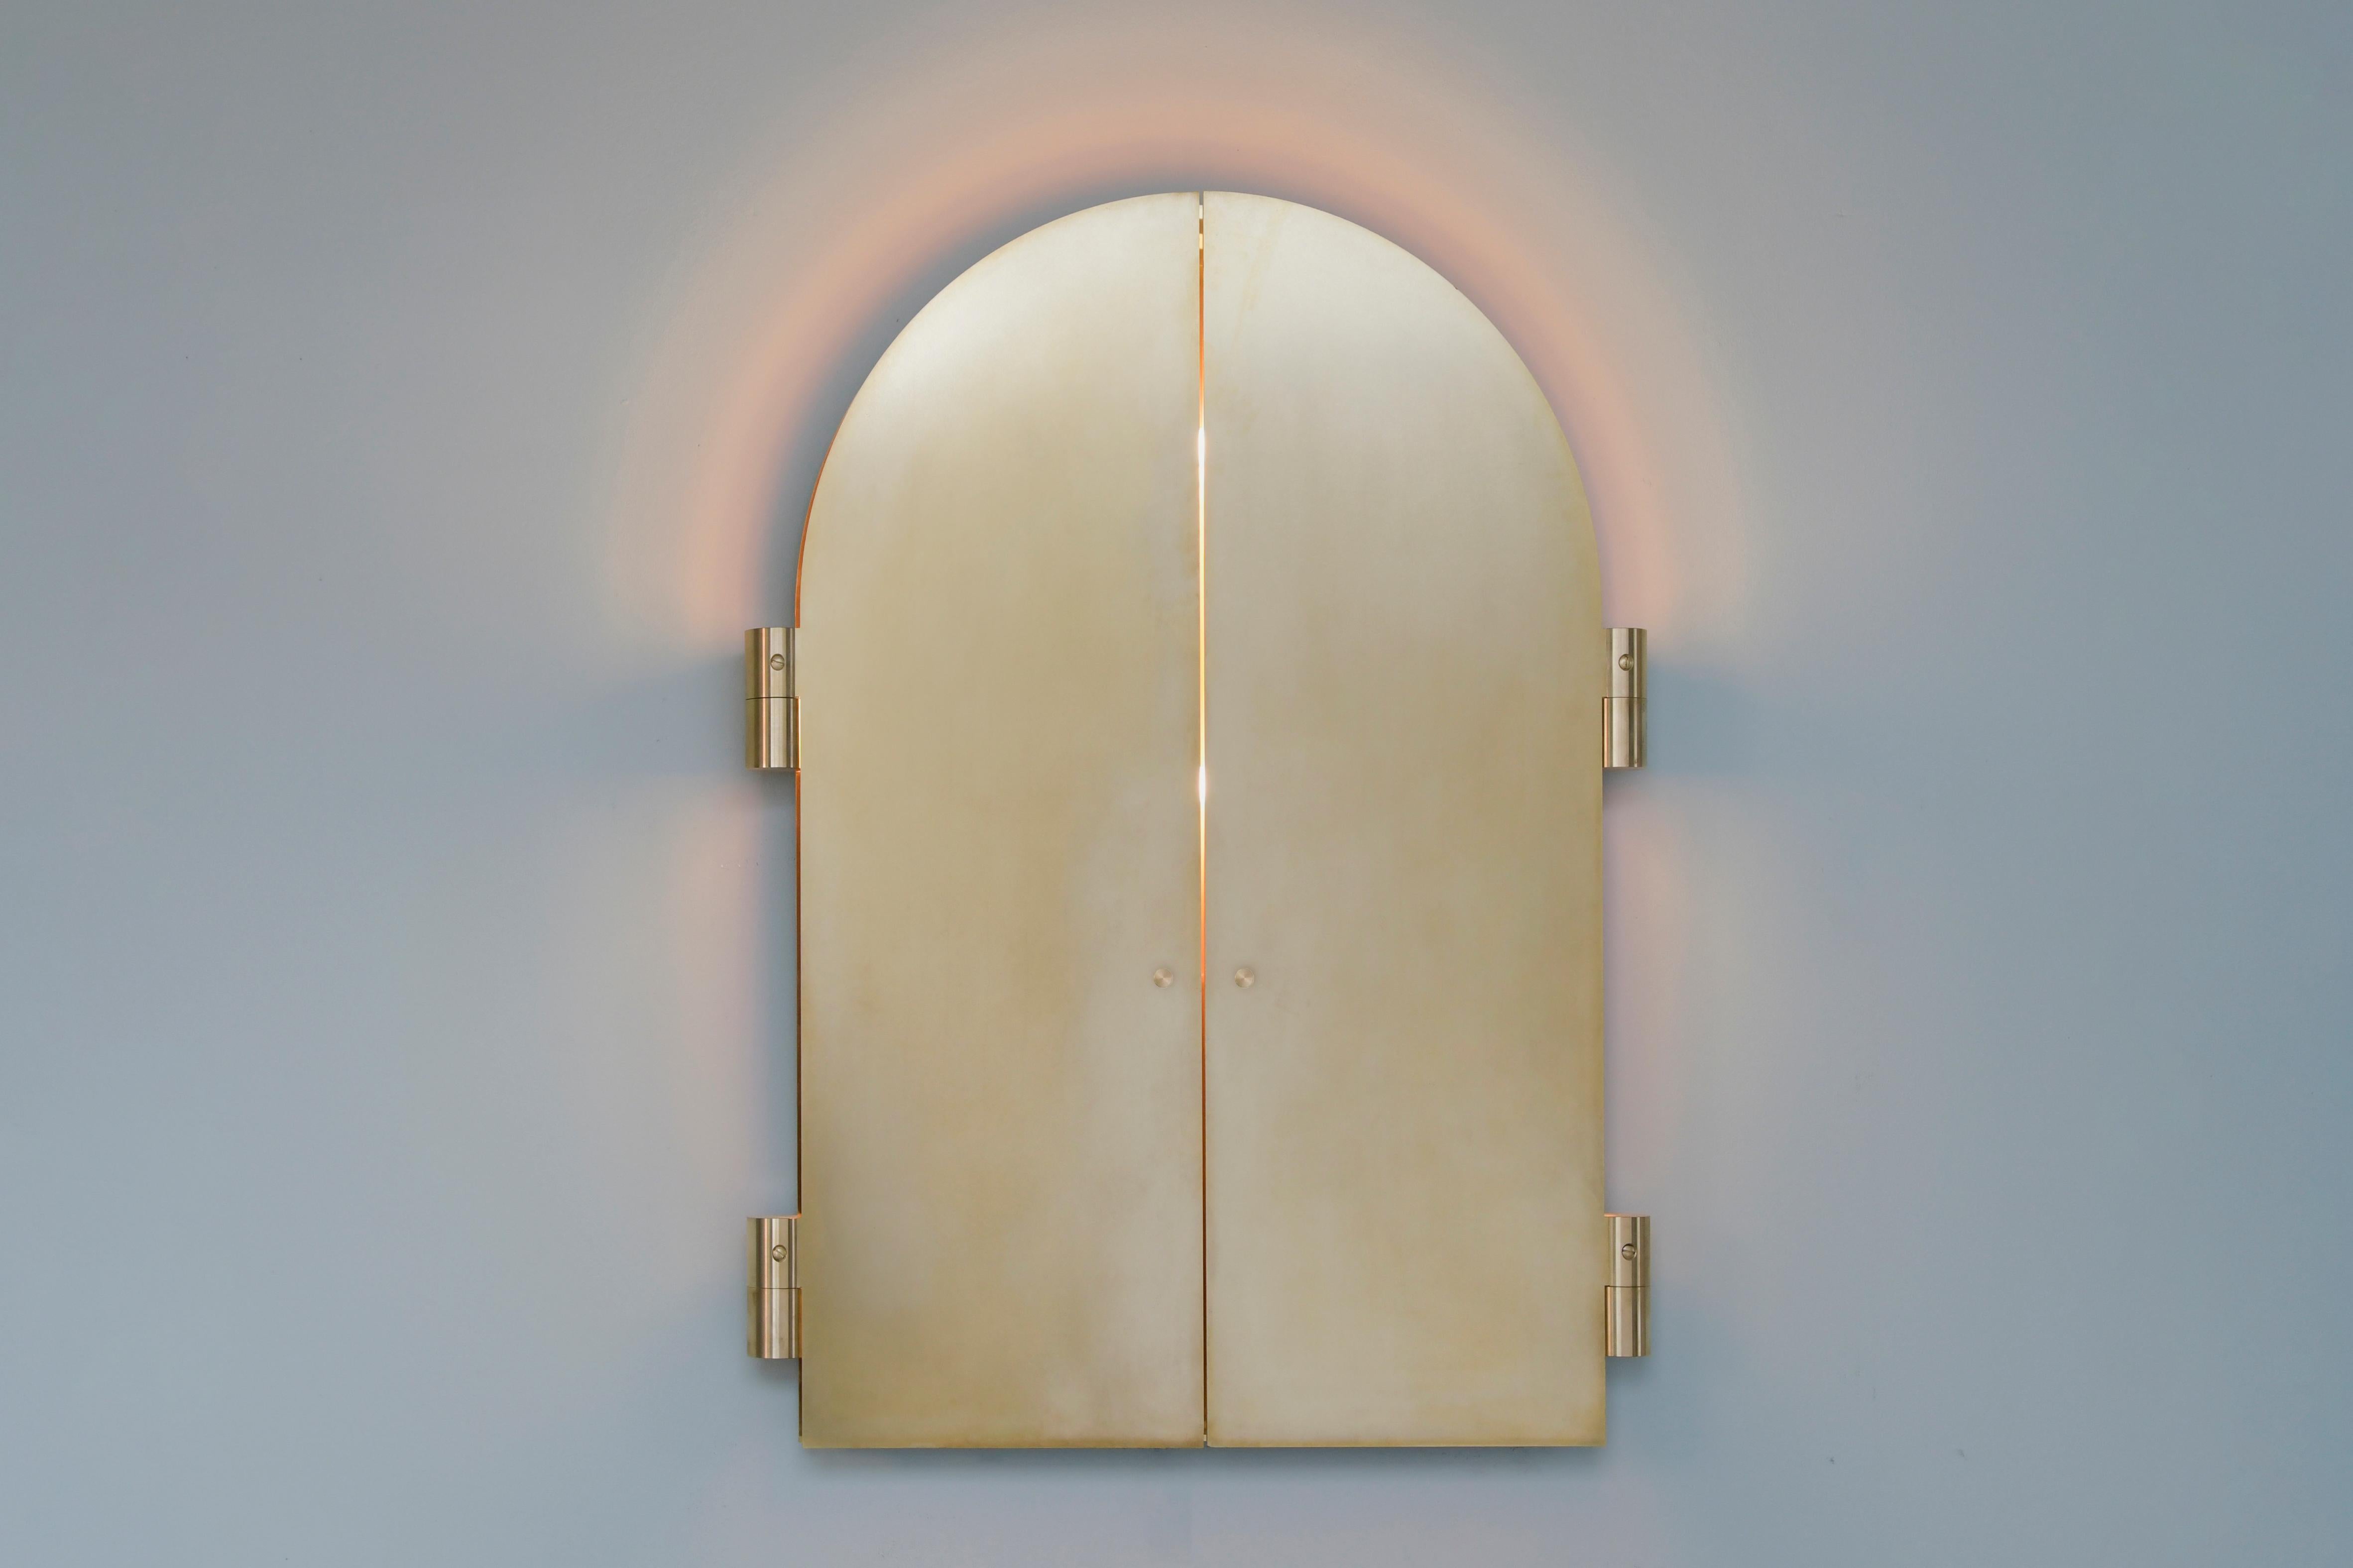 Brass triptychs enlighted mirror by Jesse Visser.
Dimensions: 100 x 140 x 5 cm
Brass, polished stainless steel, dimmable LED light.

The Triptych Circle is a circular triptych made out of polished brass. The doors consist of 3 mm brass and can